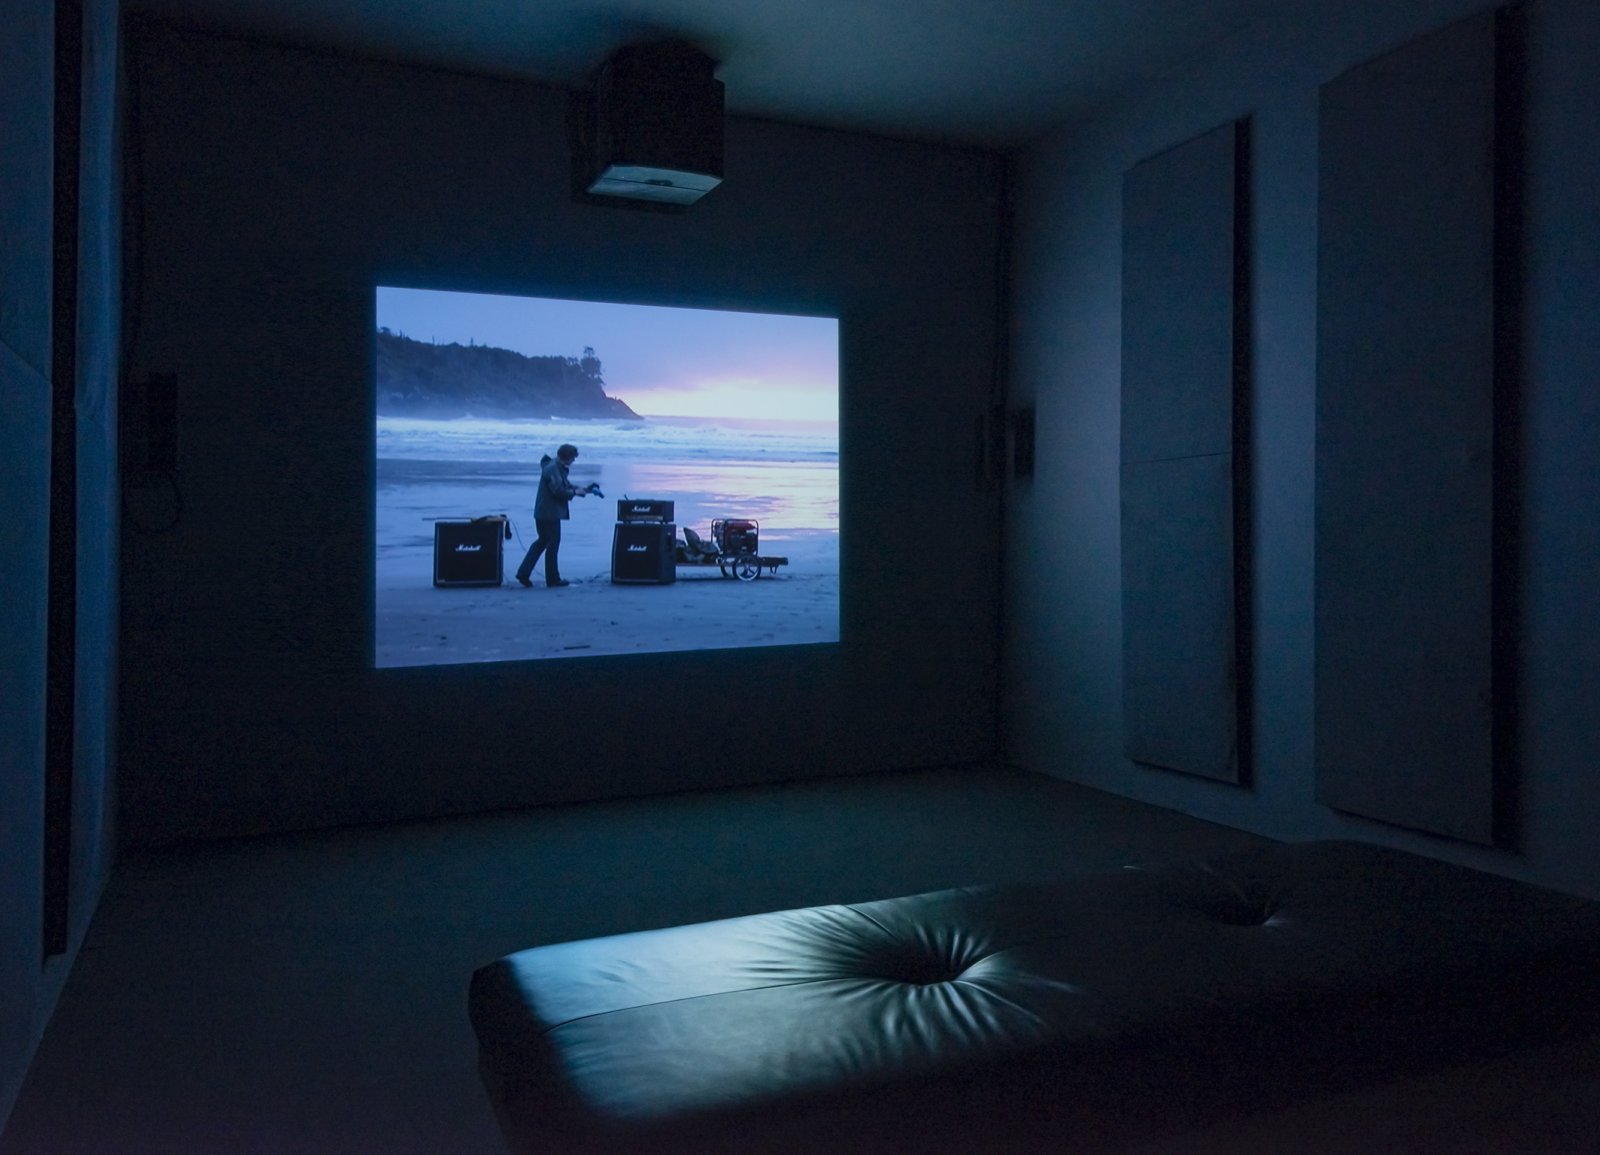 Kevin Schmidt, Long Beach Led Zep, 2002, single channel video from DVD, 9 minutes, 12 seconds looped. Installation view, The Commons, Kamloops Art Gallery, Kamloops, Canada, 2015